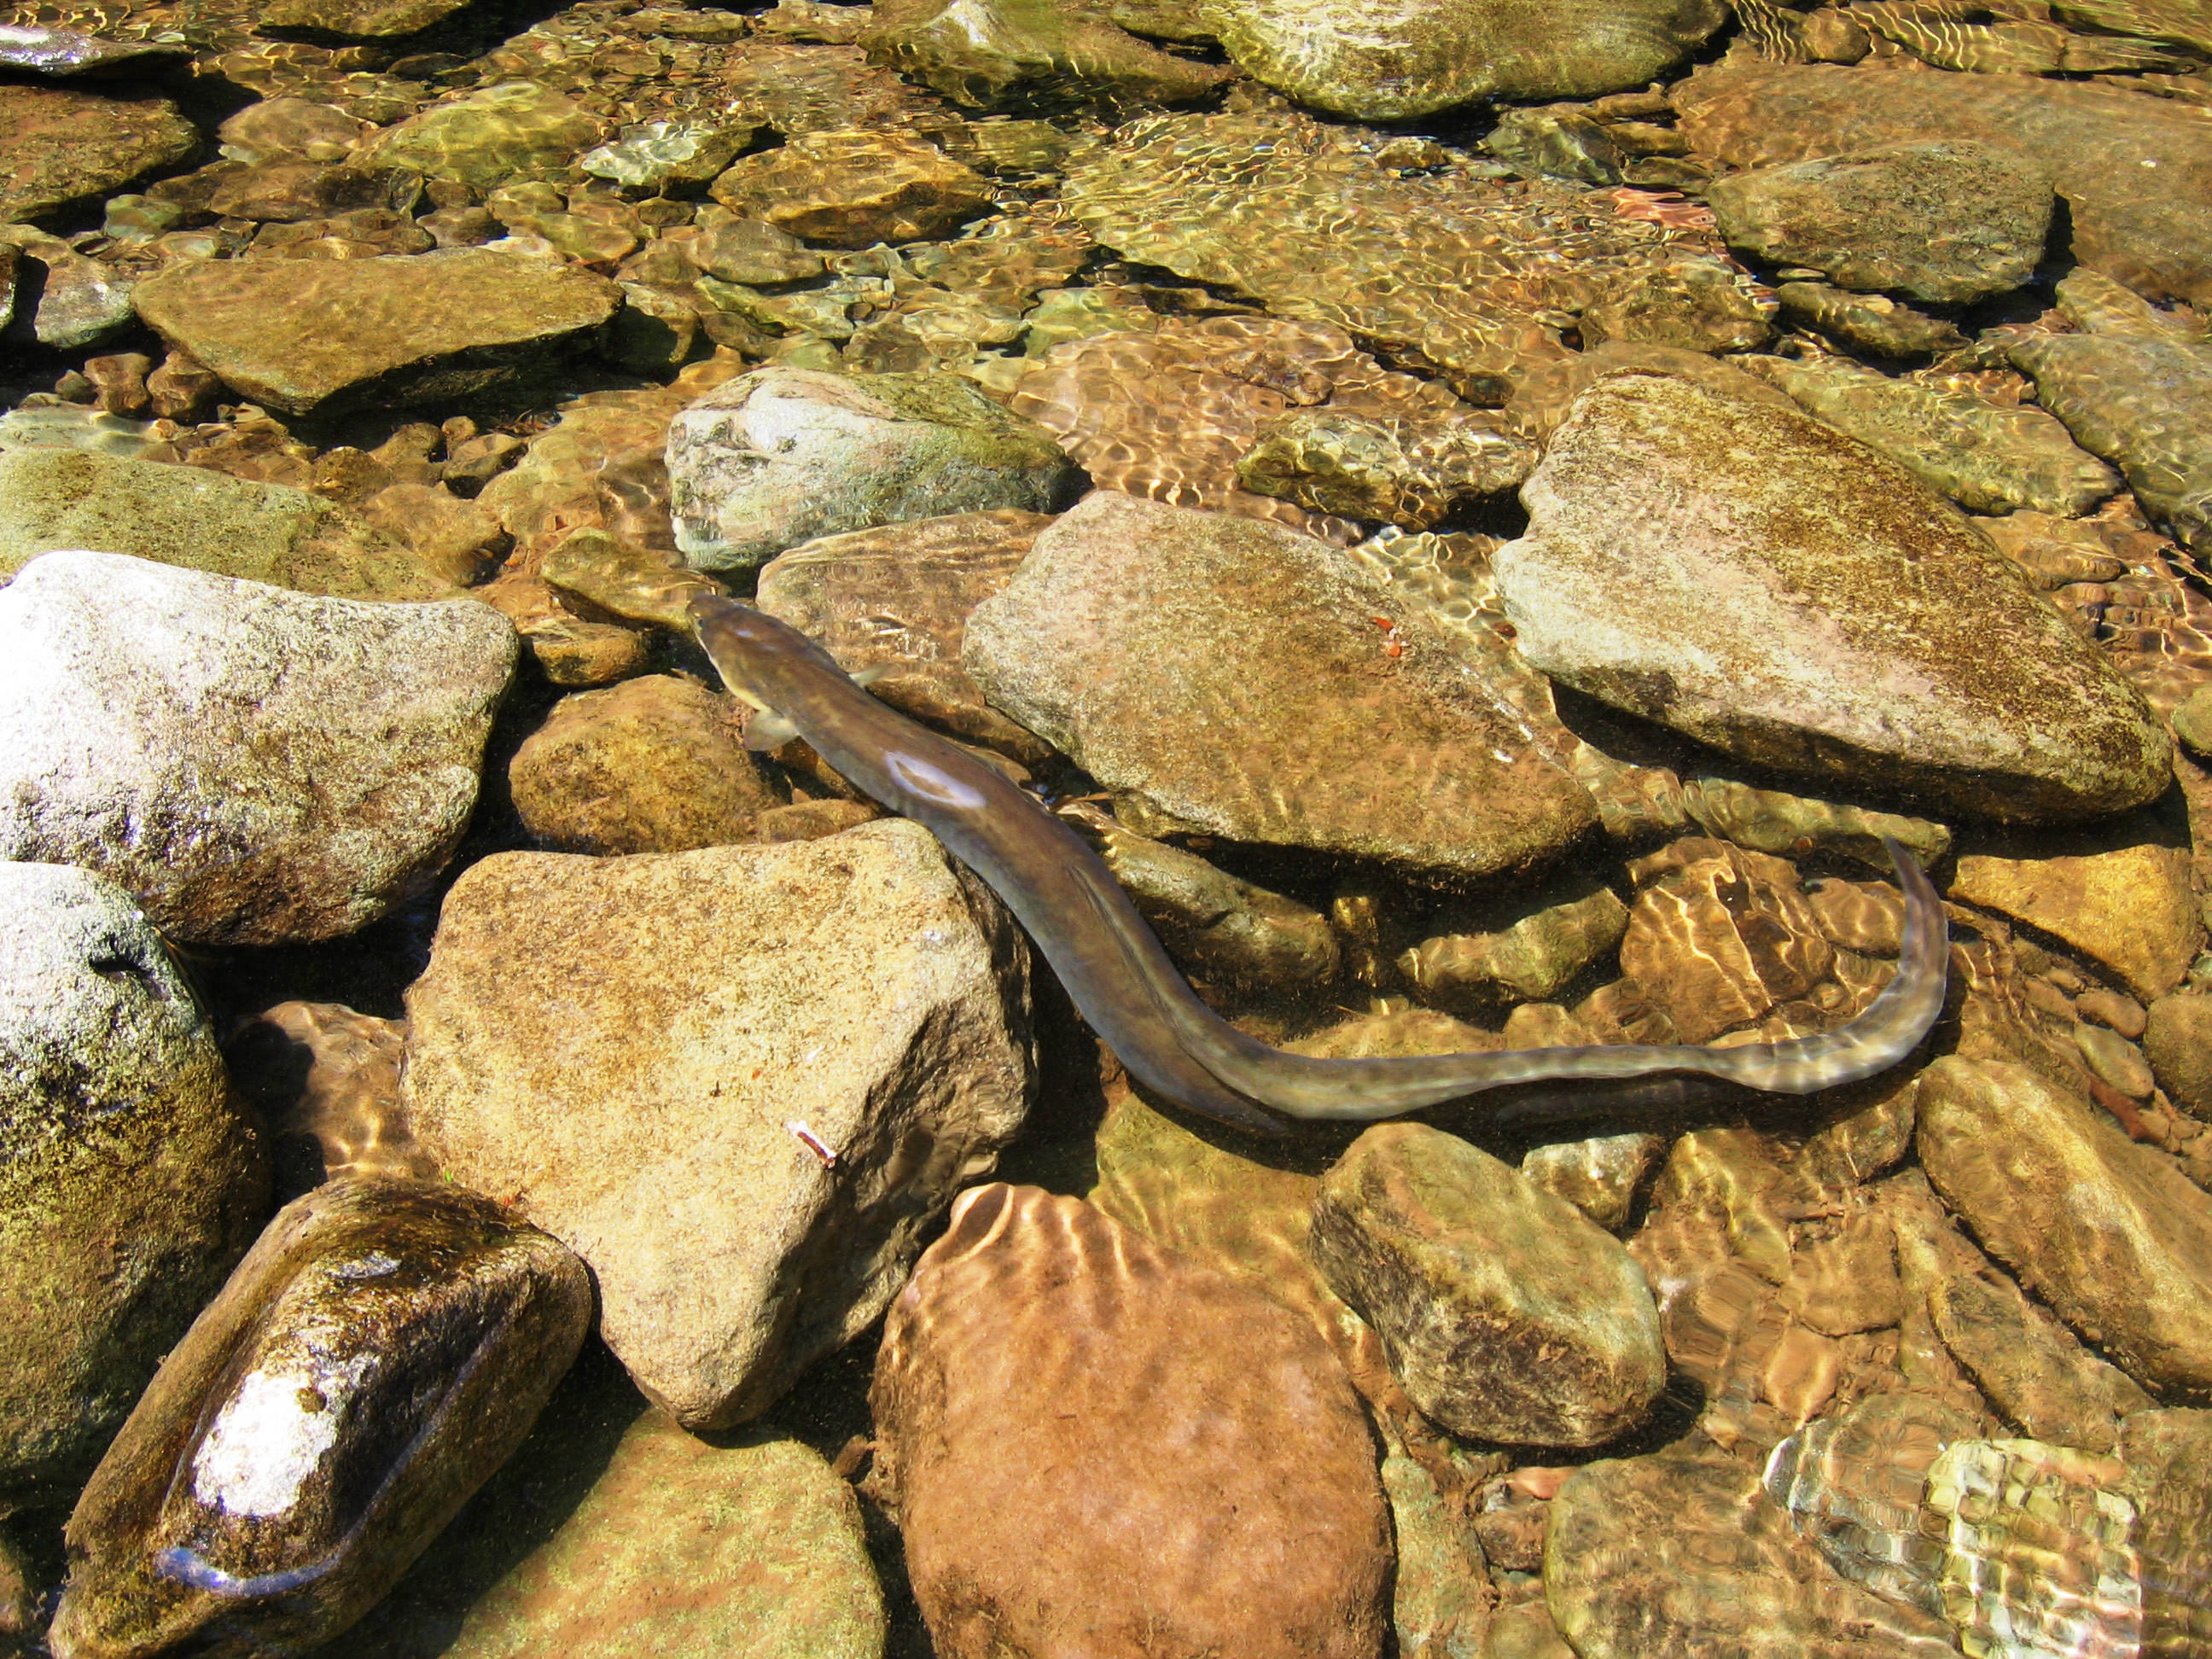 An eel swims between two rocks in a stream.